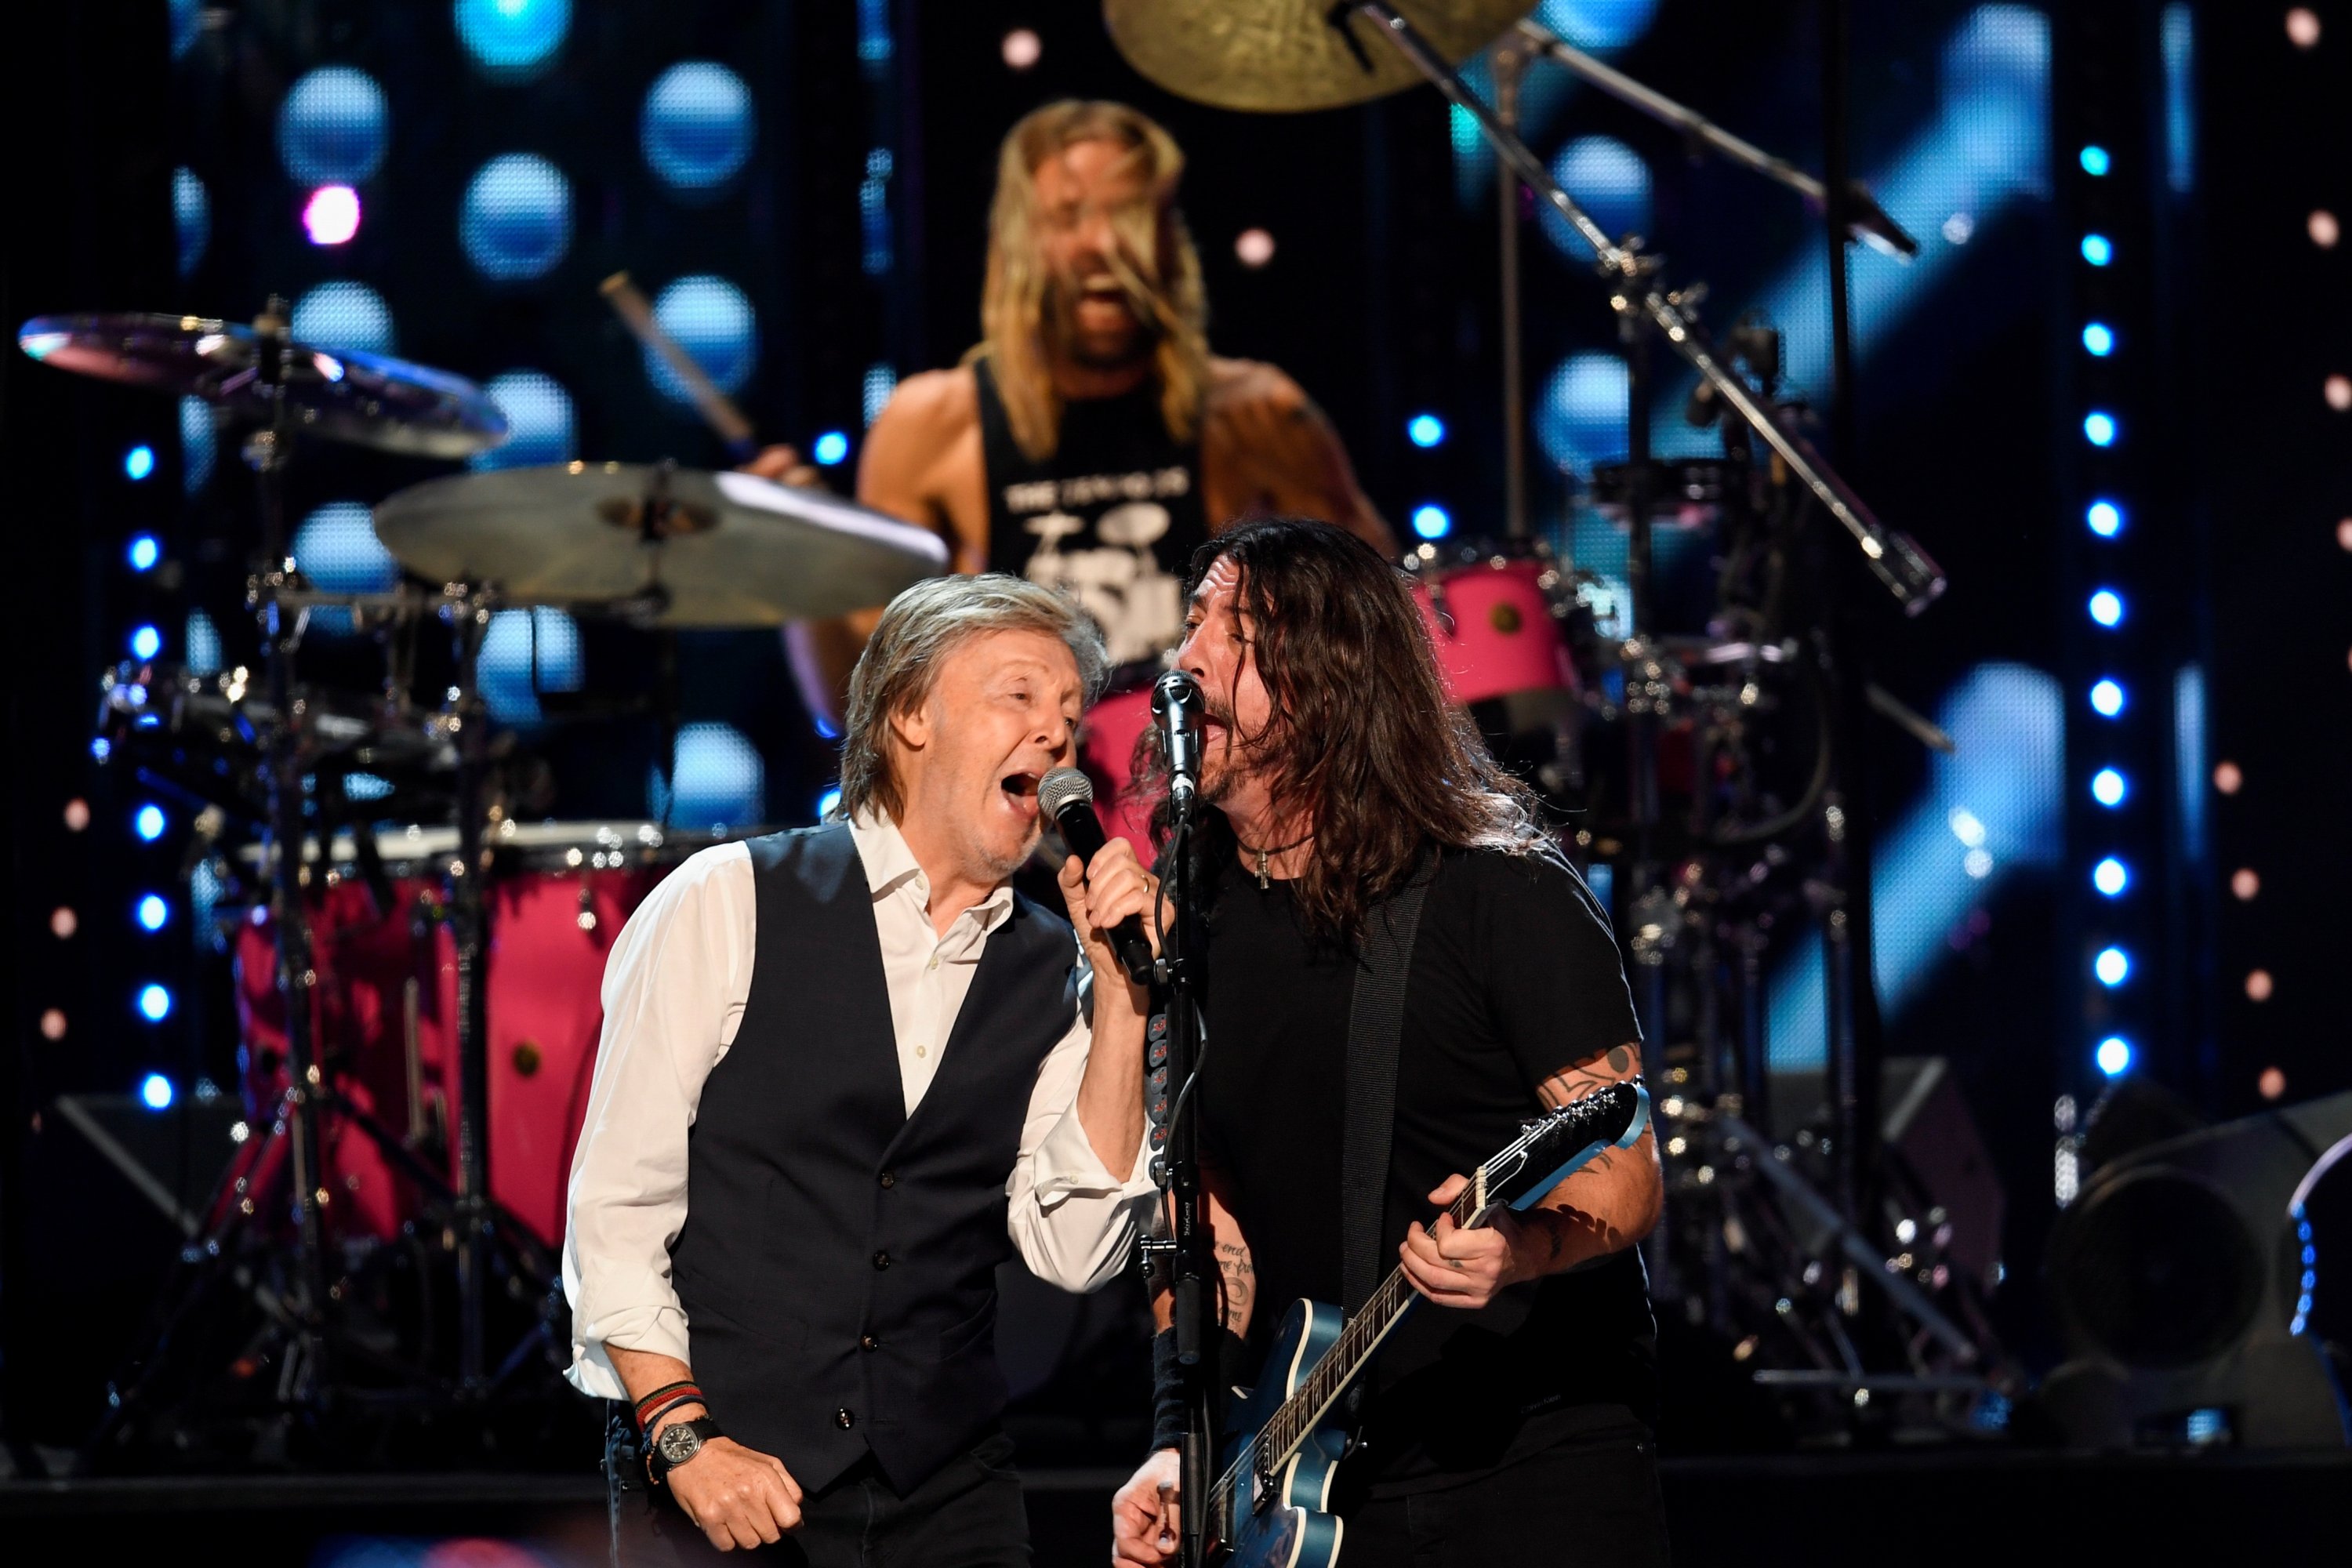 Sir Paul McCartney performs the Beatles song "Get Back" with the Foo Fighters after they were inducted into the Rock and Roll Hall of Fame in Cleveland, Ohio, U.S. Oct. 31, 2021. (Reuters Photo)